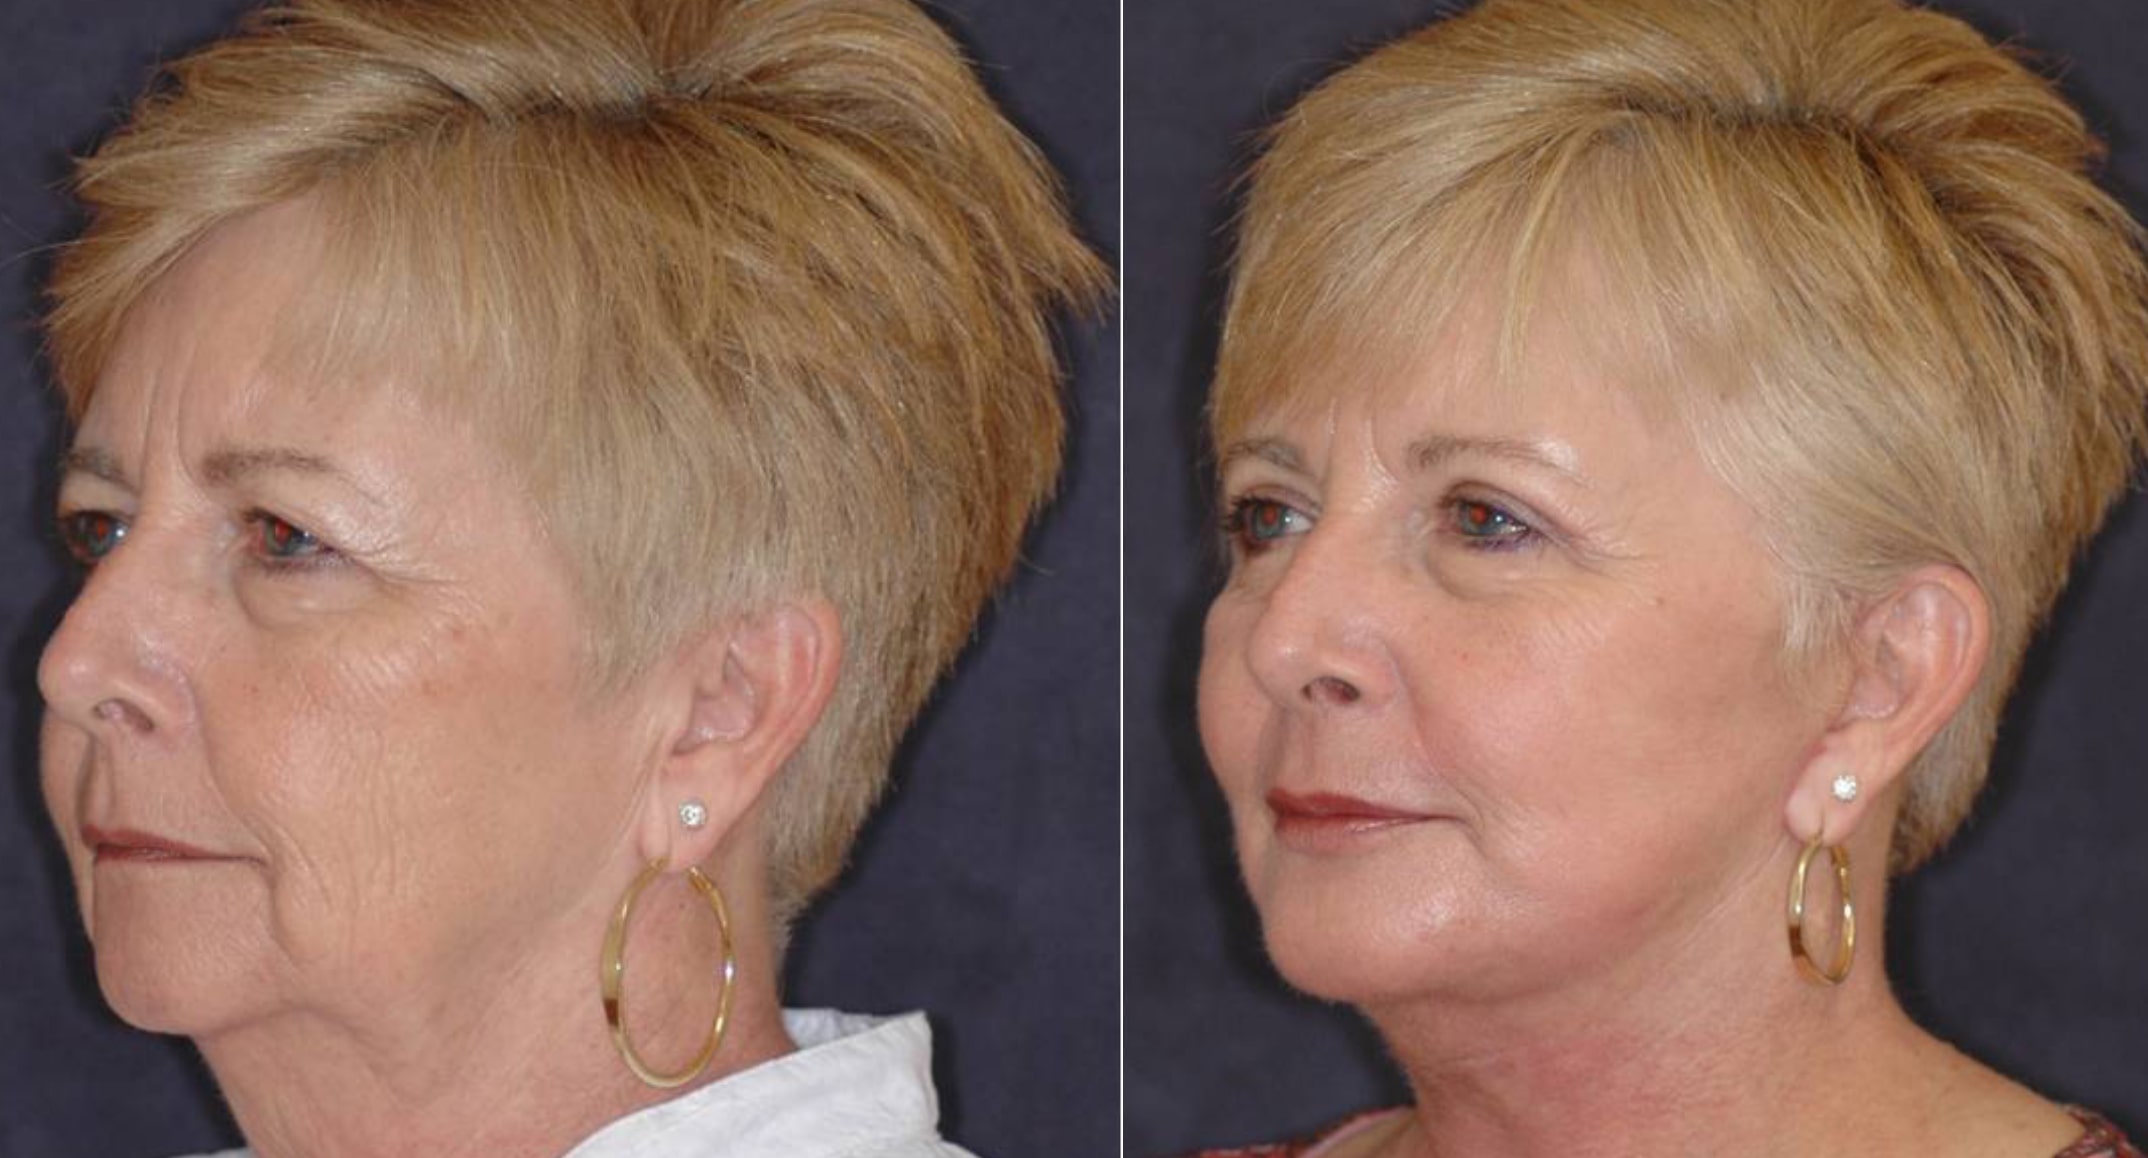 Lower facelift - before and after